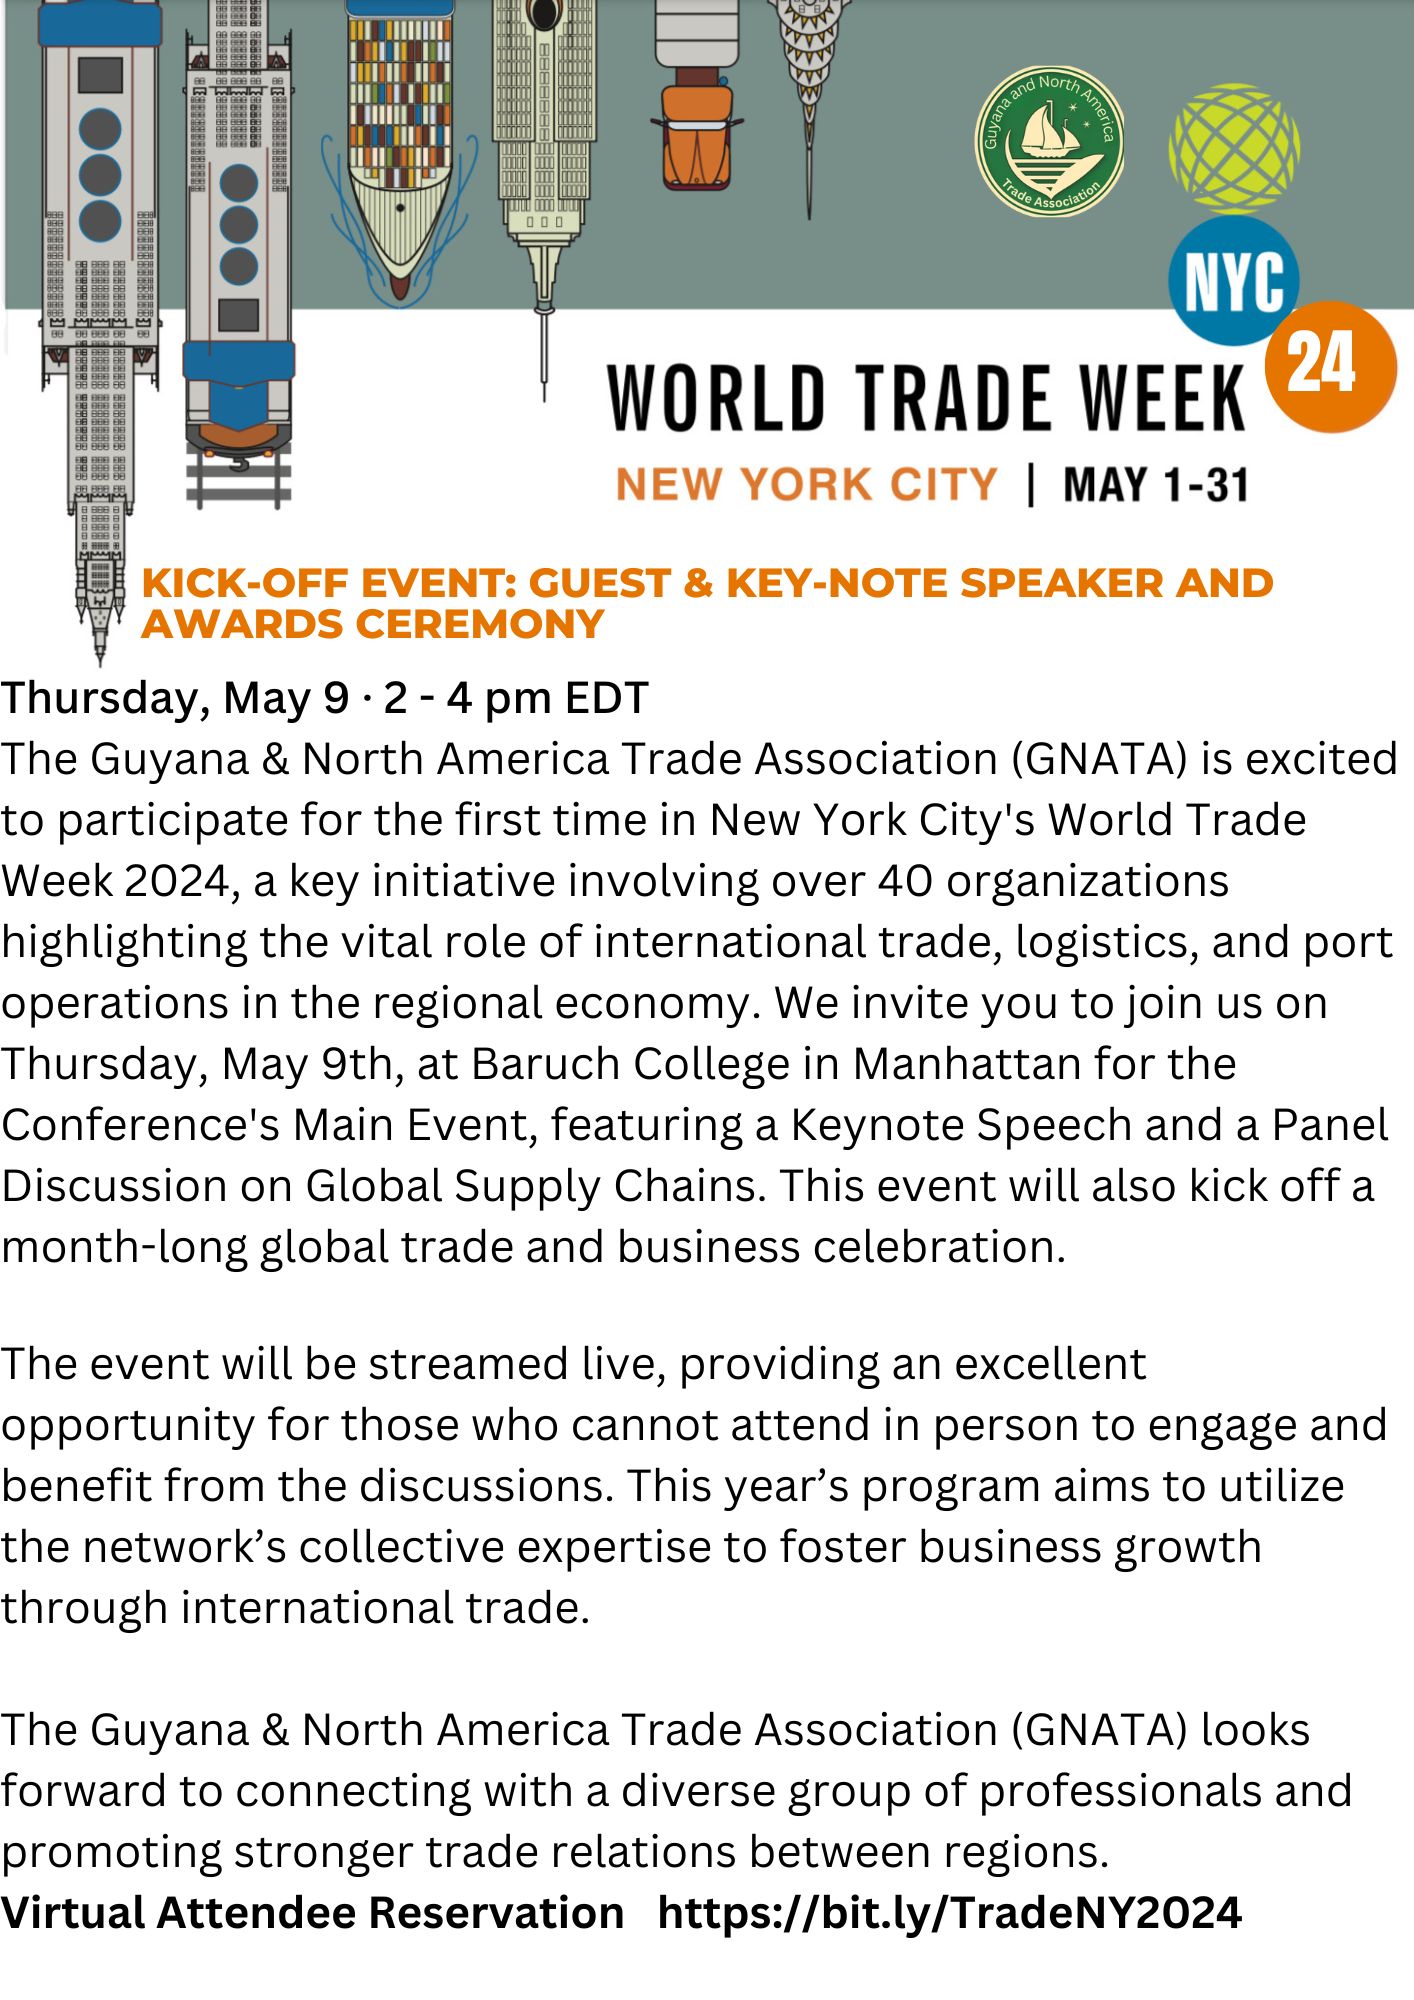 World Trade Week Event in New York